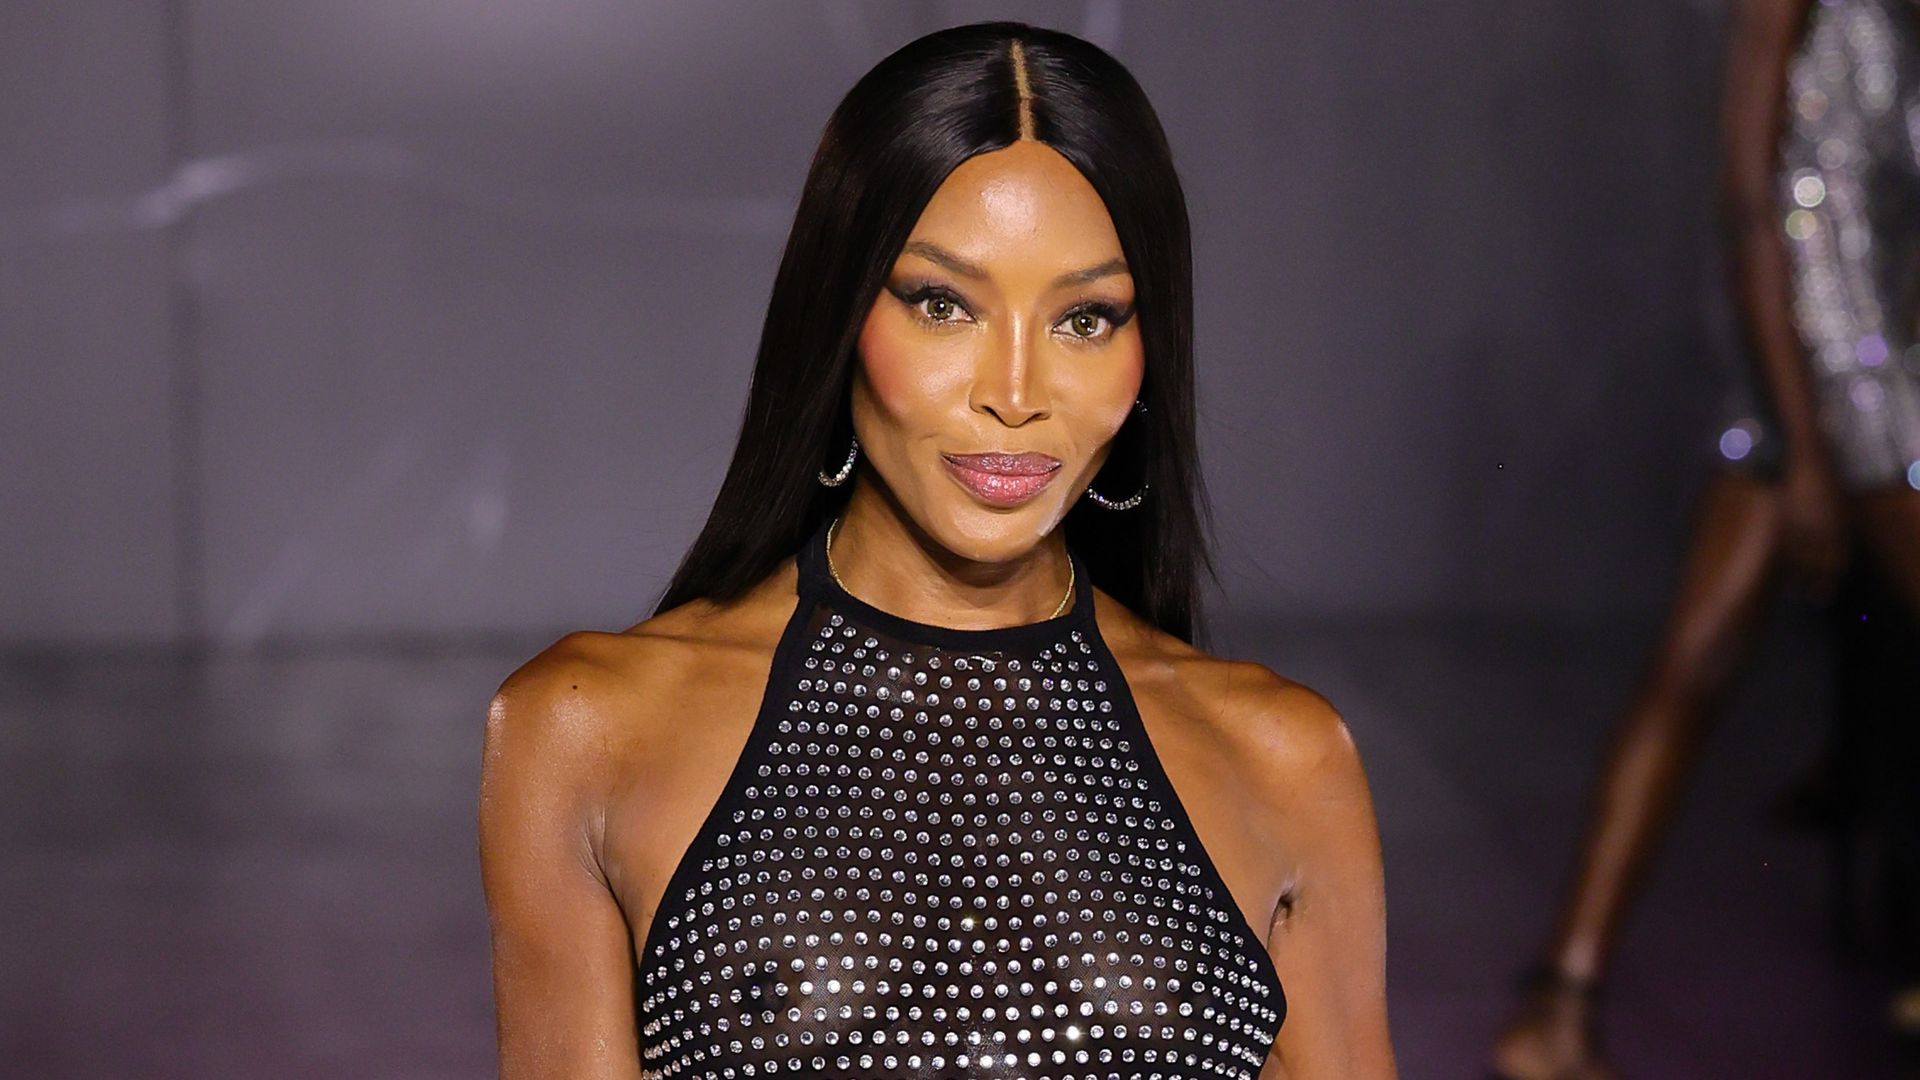 NEW YORK, NEW YORK - SEPTEMBER 05:  Naomi Campbell during PrettyLittleThing x Naomi Campbell - Runway at Cipriani 25 Broadway on September 05, 2023 in New York City. (Photo by Theo Wargo/Getty Images)